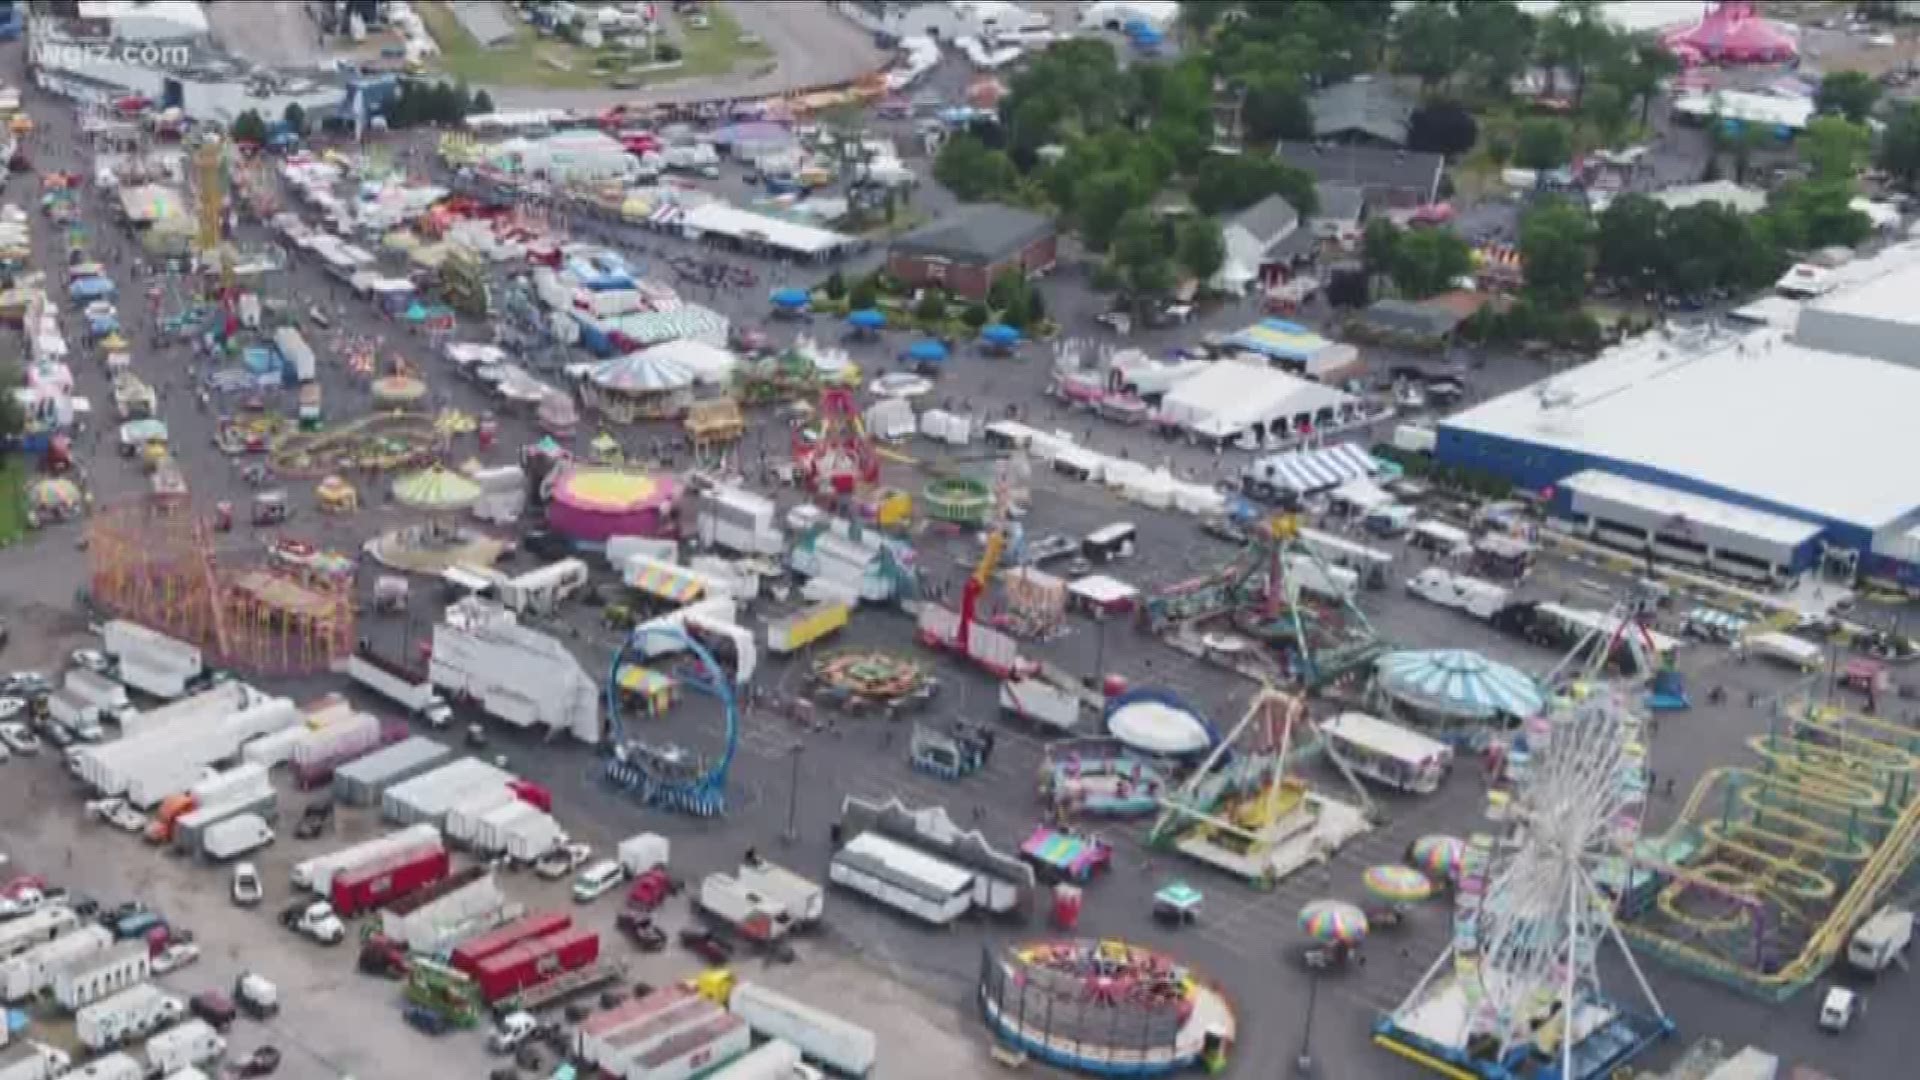 A record one million, 238 thousand, 456 people went to the fair over the last 12 days..